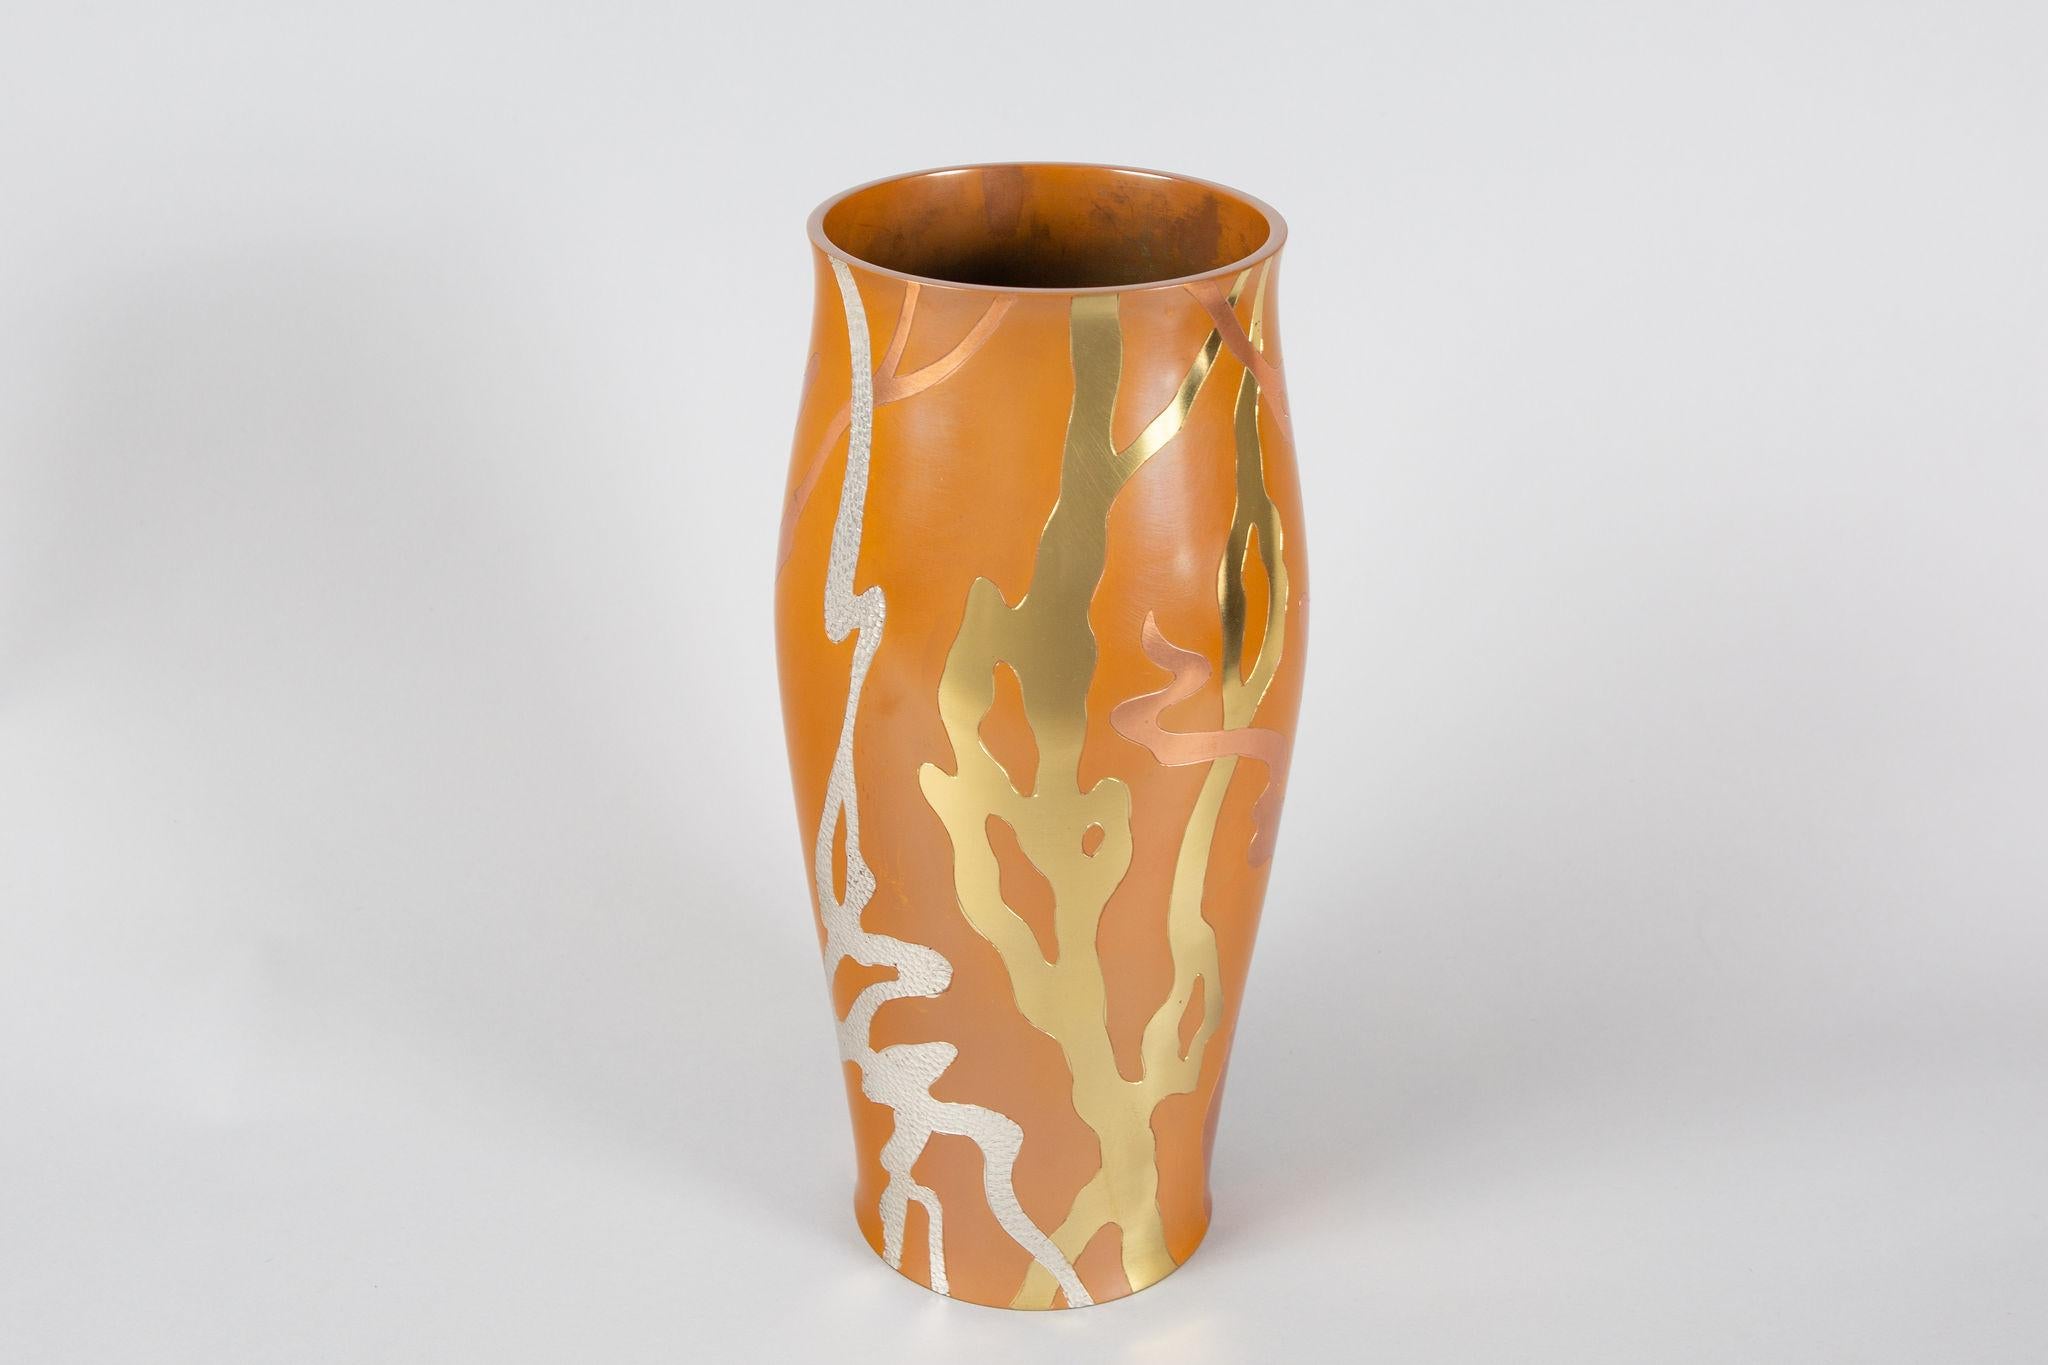 Modern bronze vase with inlay silver, and hammered metal to create an overlapping organic design. Signature reads: Shiho.